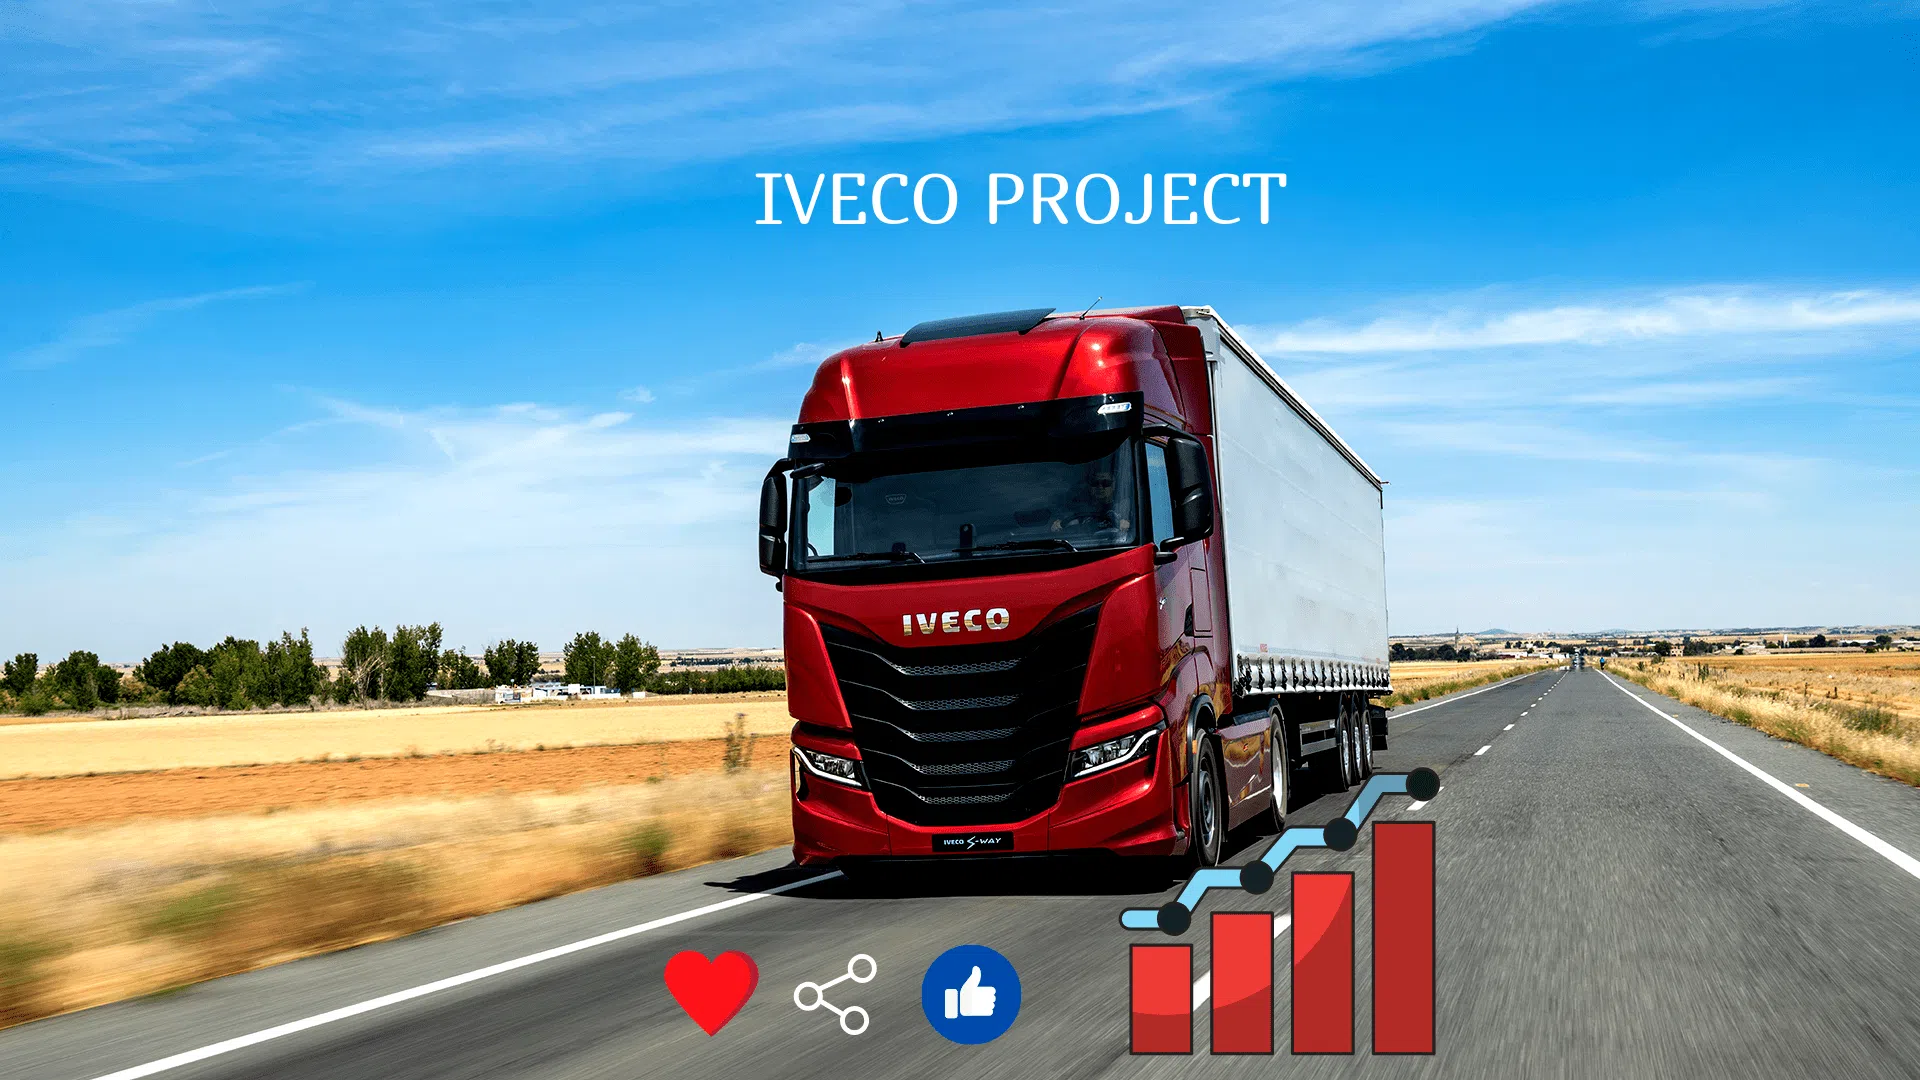 IVECO PROJECT